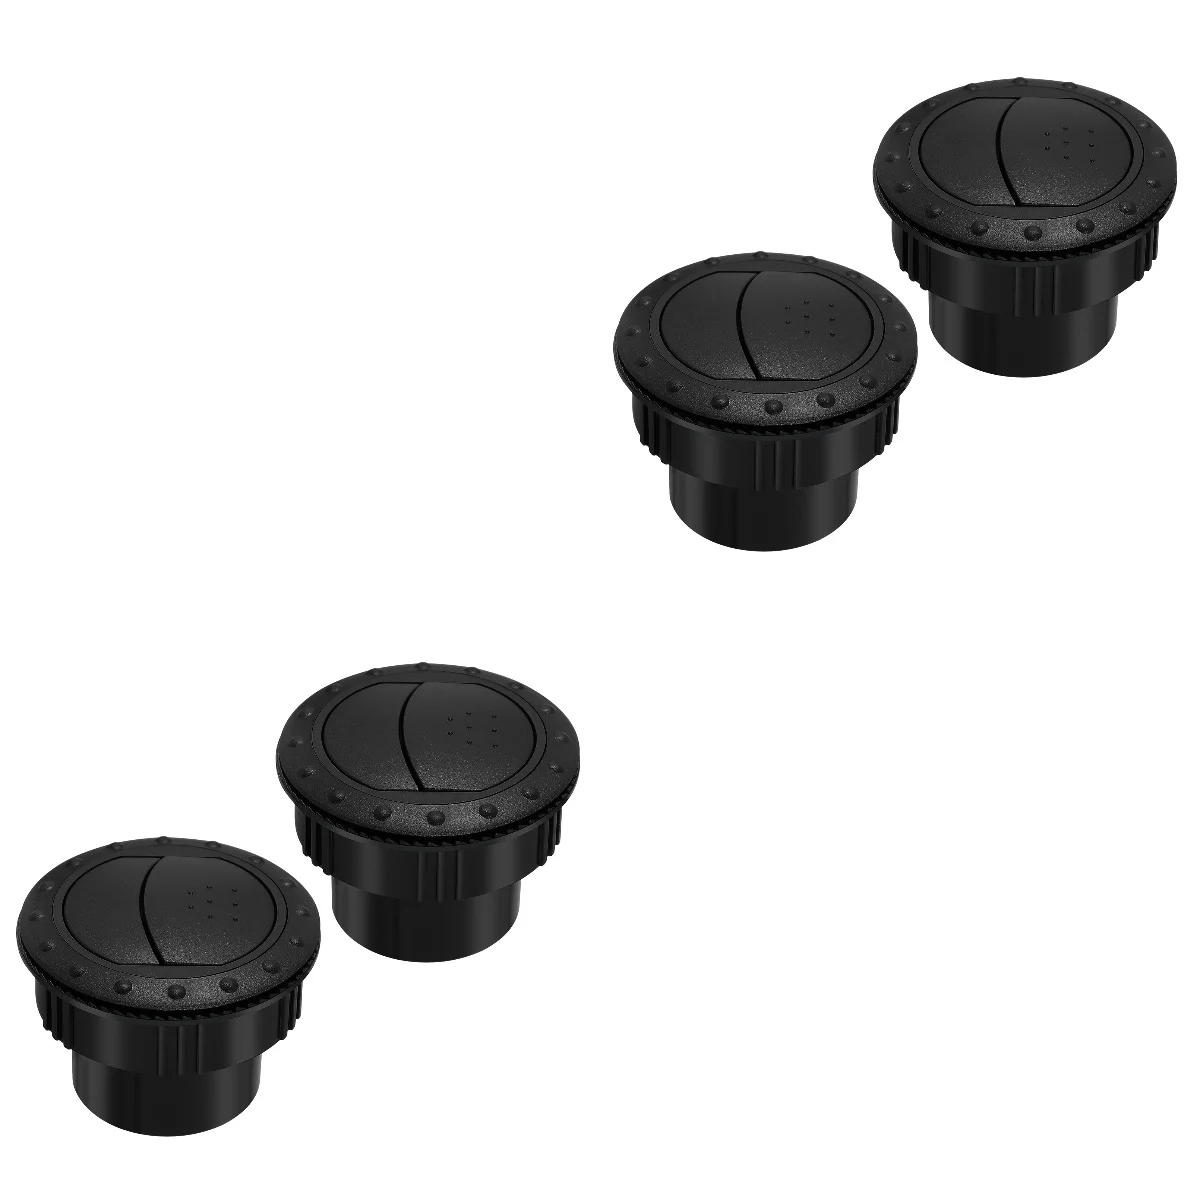 

4 Pcs Dashboard Air Conditioner Outlet Air Vent Outlet 60mm Dash Vent Exhaust Grille for Car A1176 RV Black